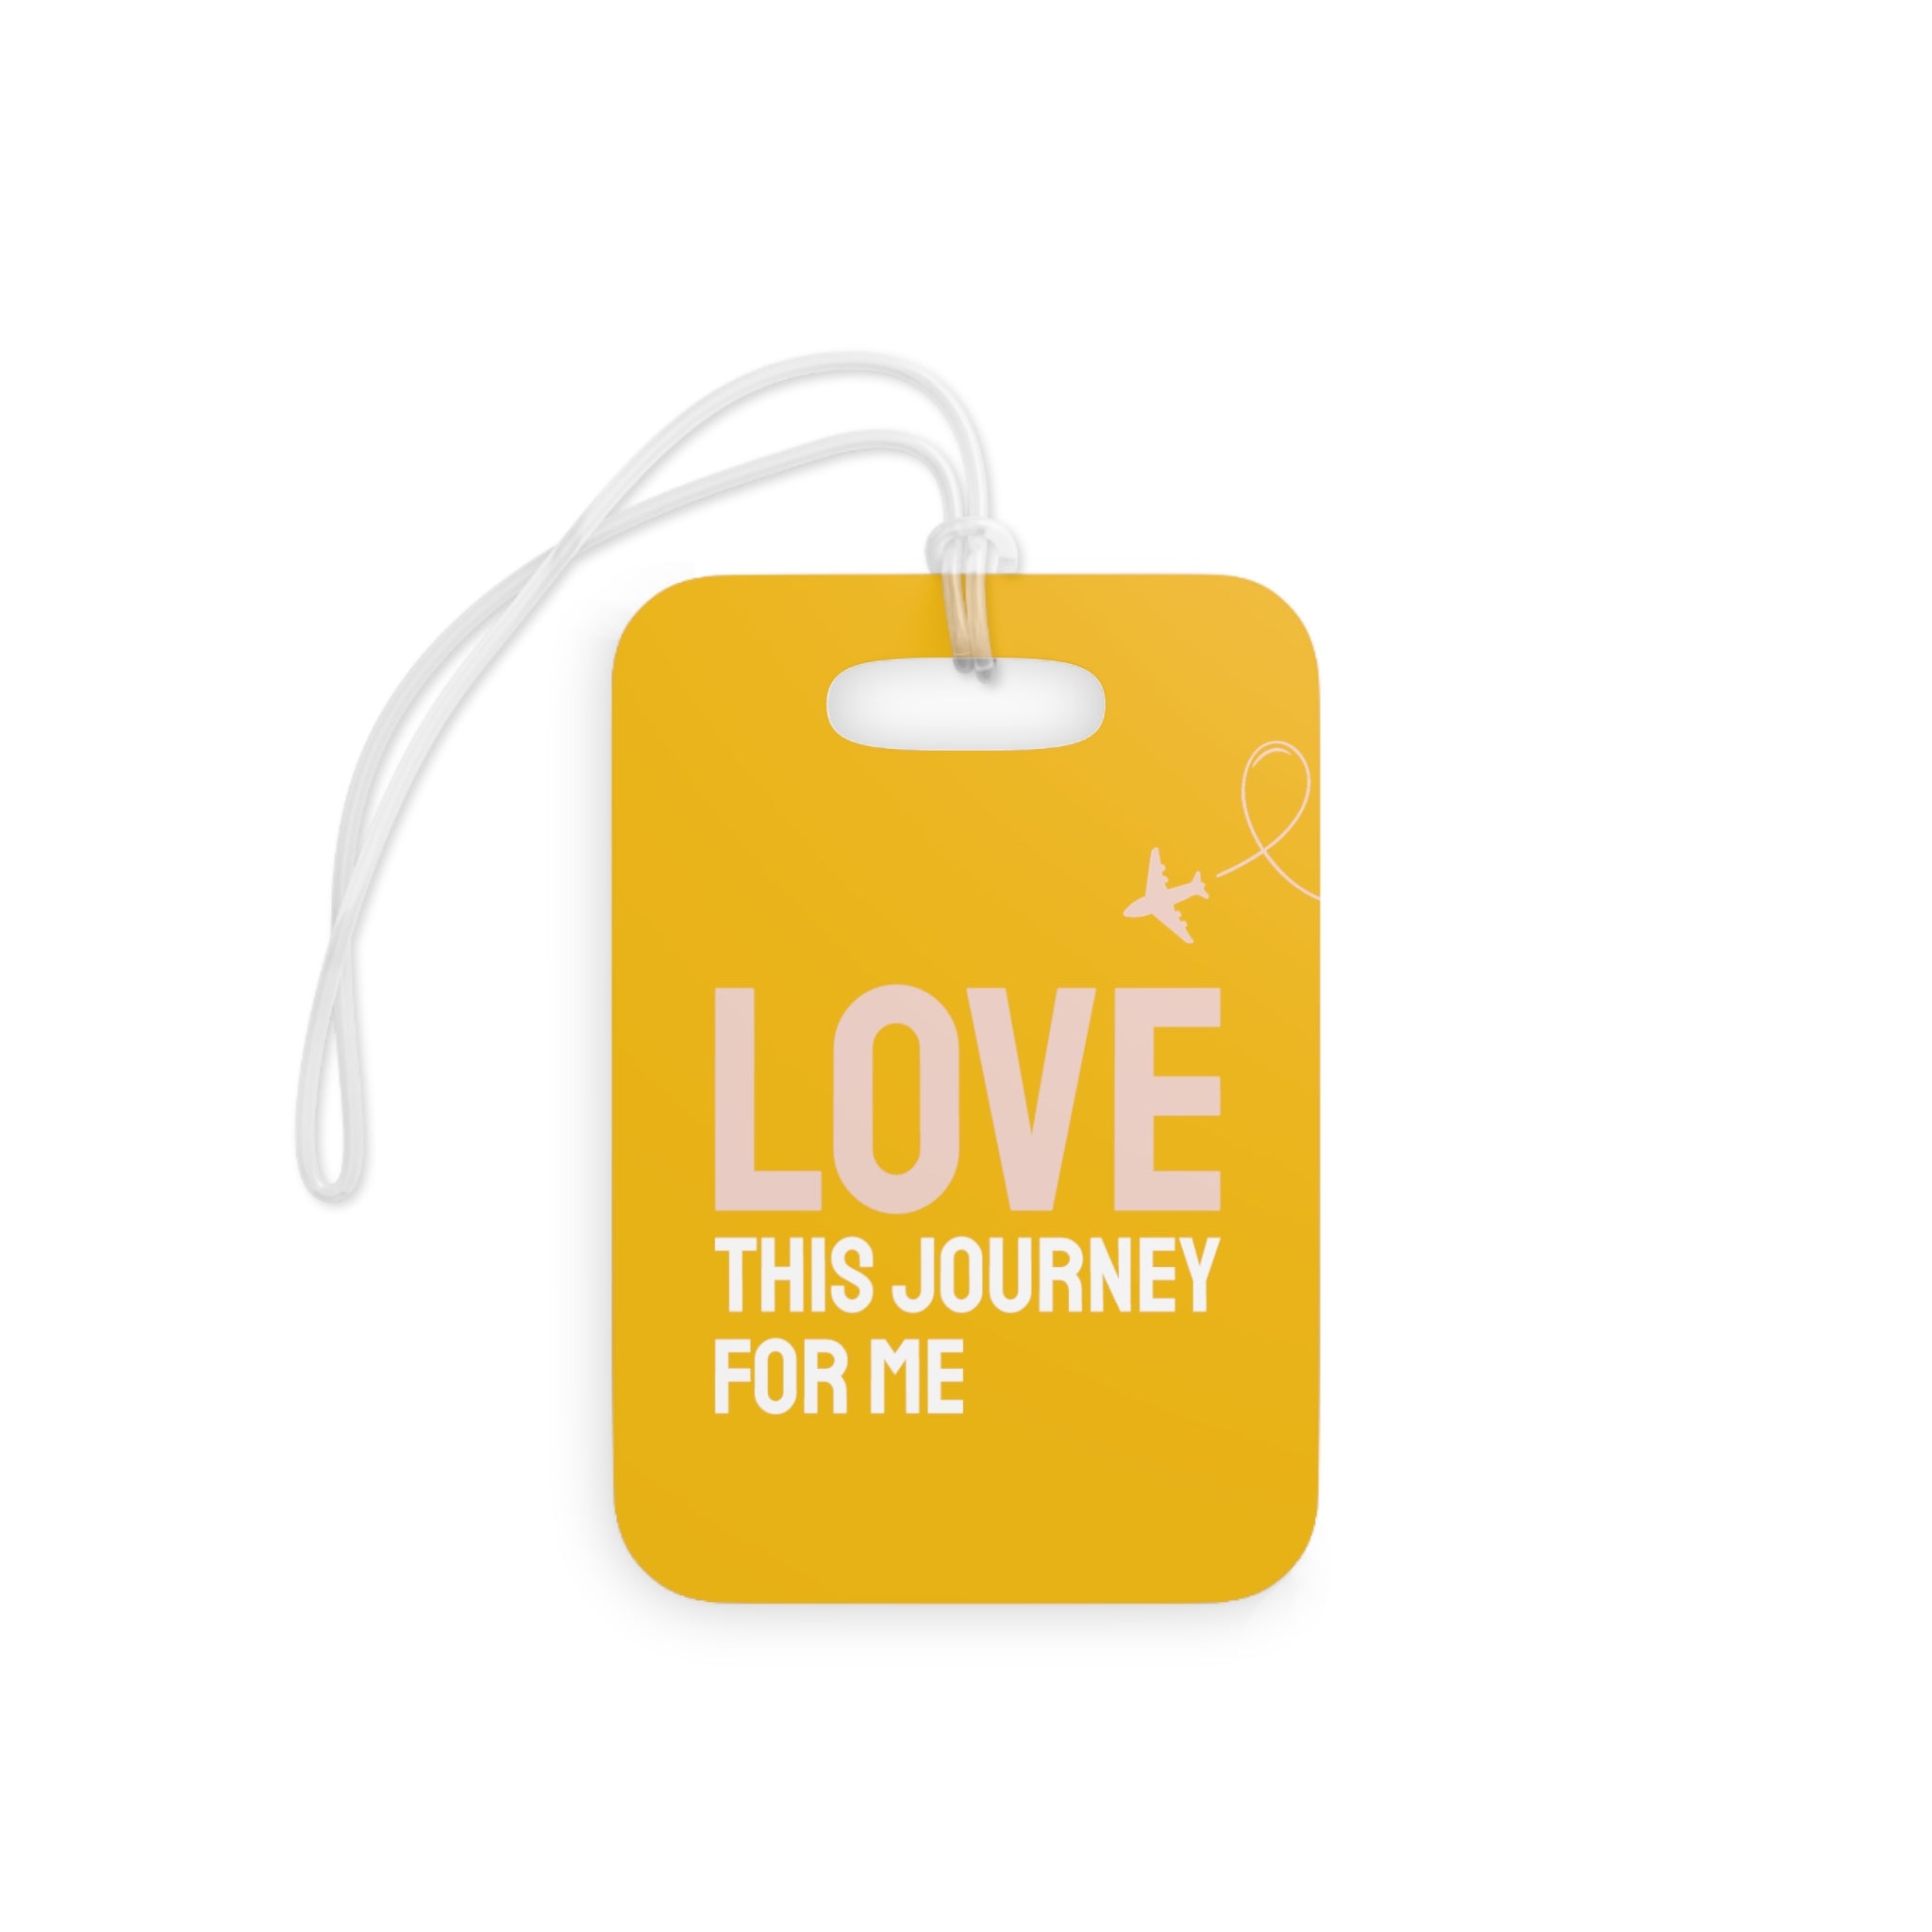 Love this journey for me Luggage Tag (Yellow)